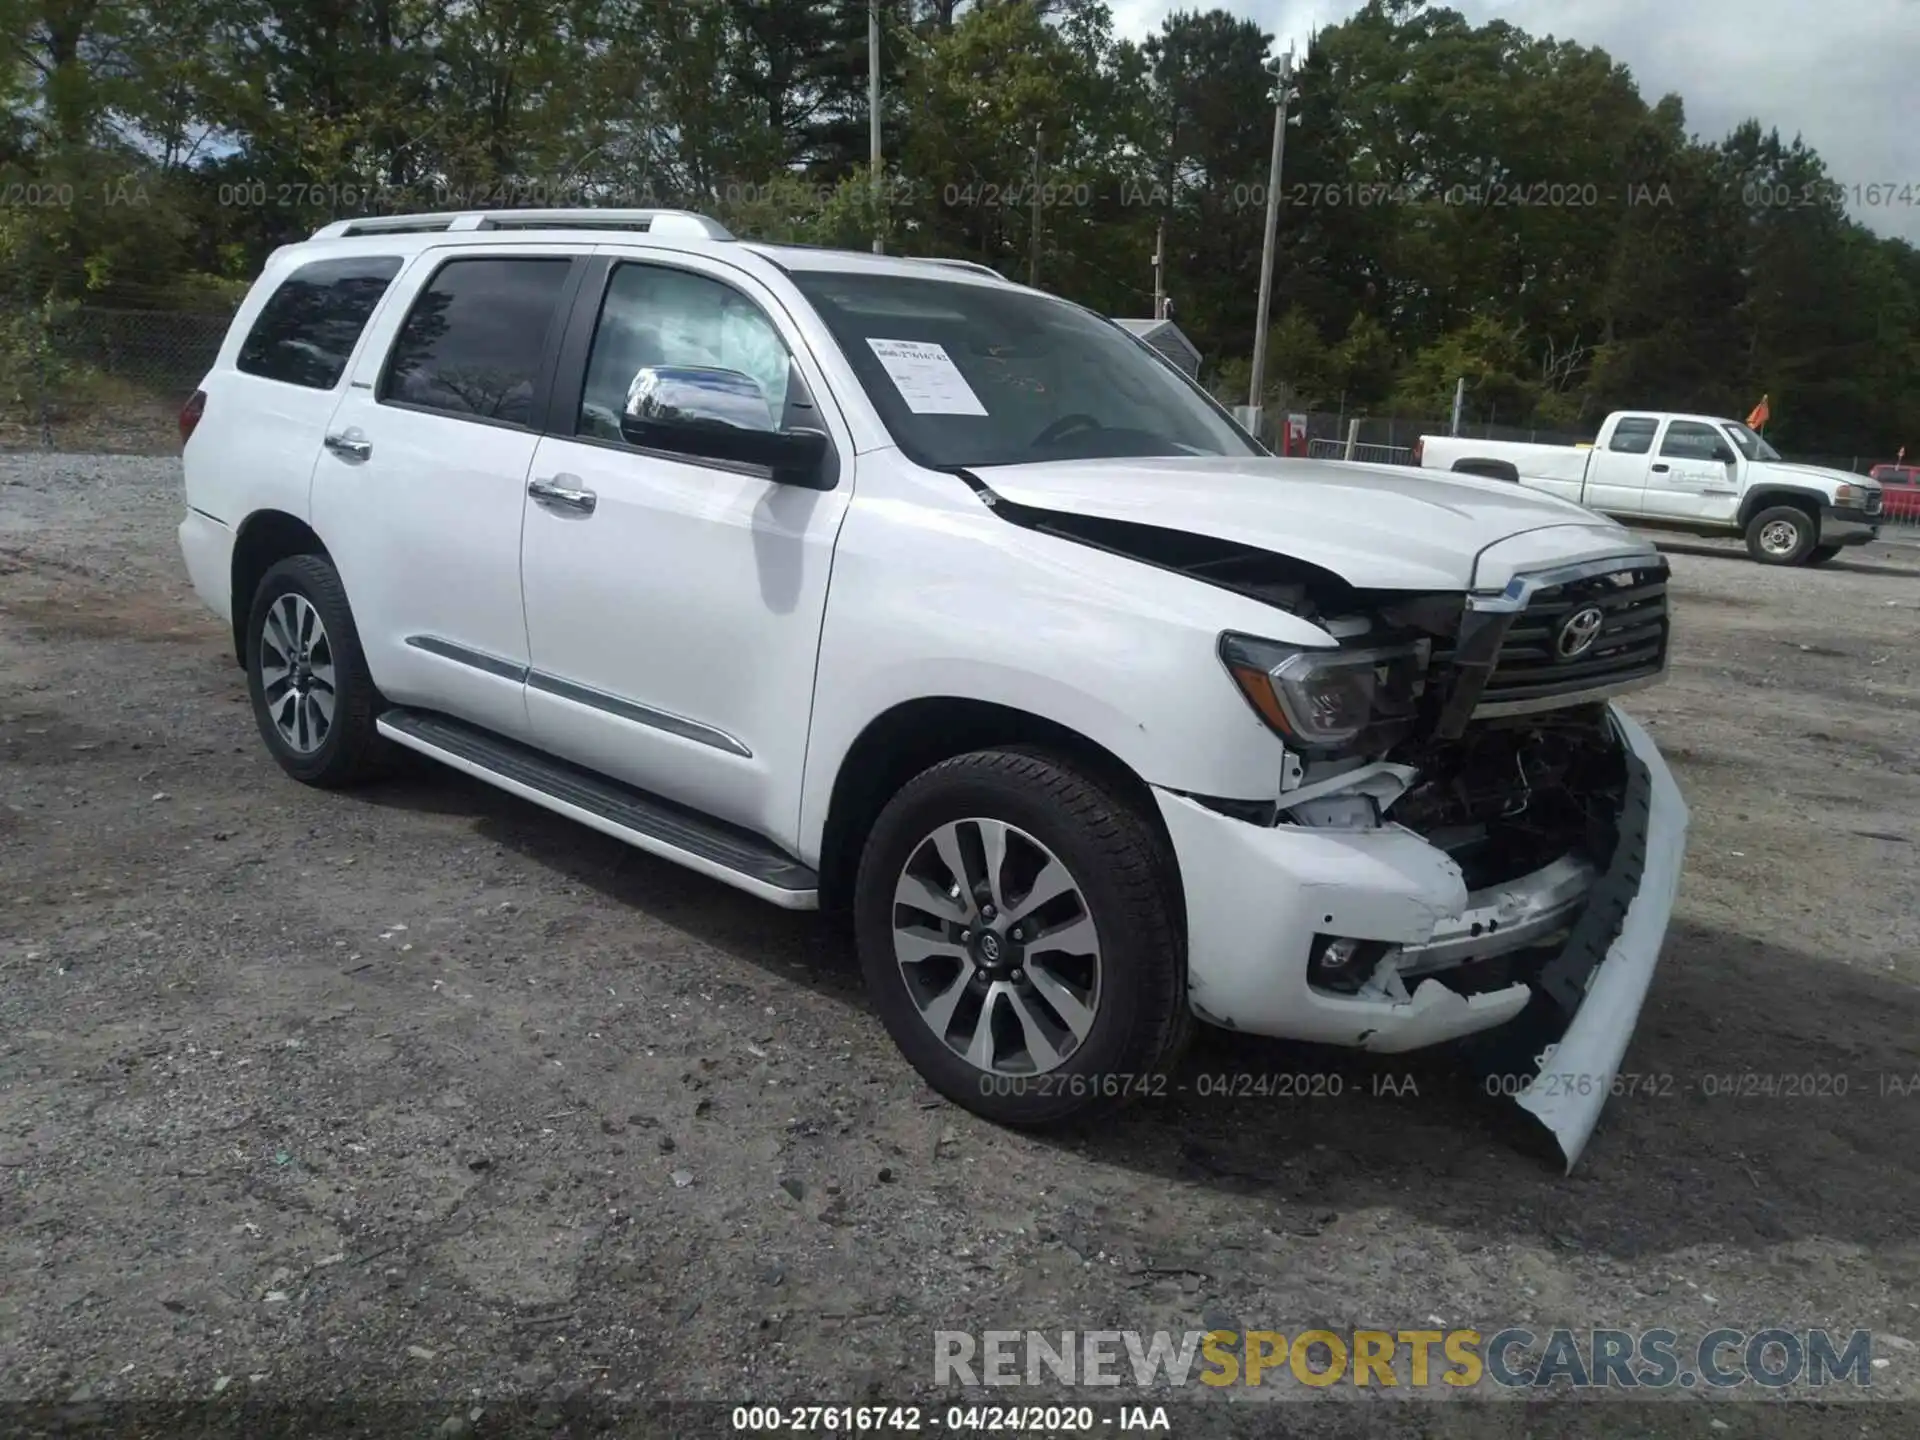 1 Photograph of a damaged car 5TDJY5G12KS171373 TOYOTA SEQUOIA 2019